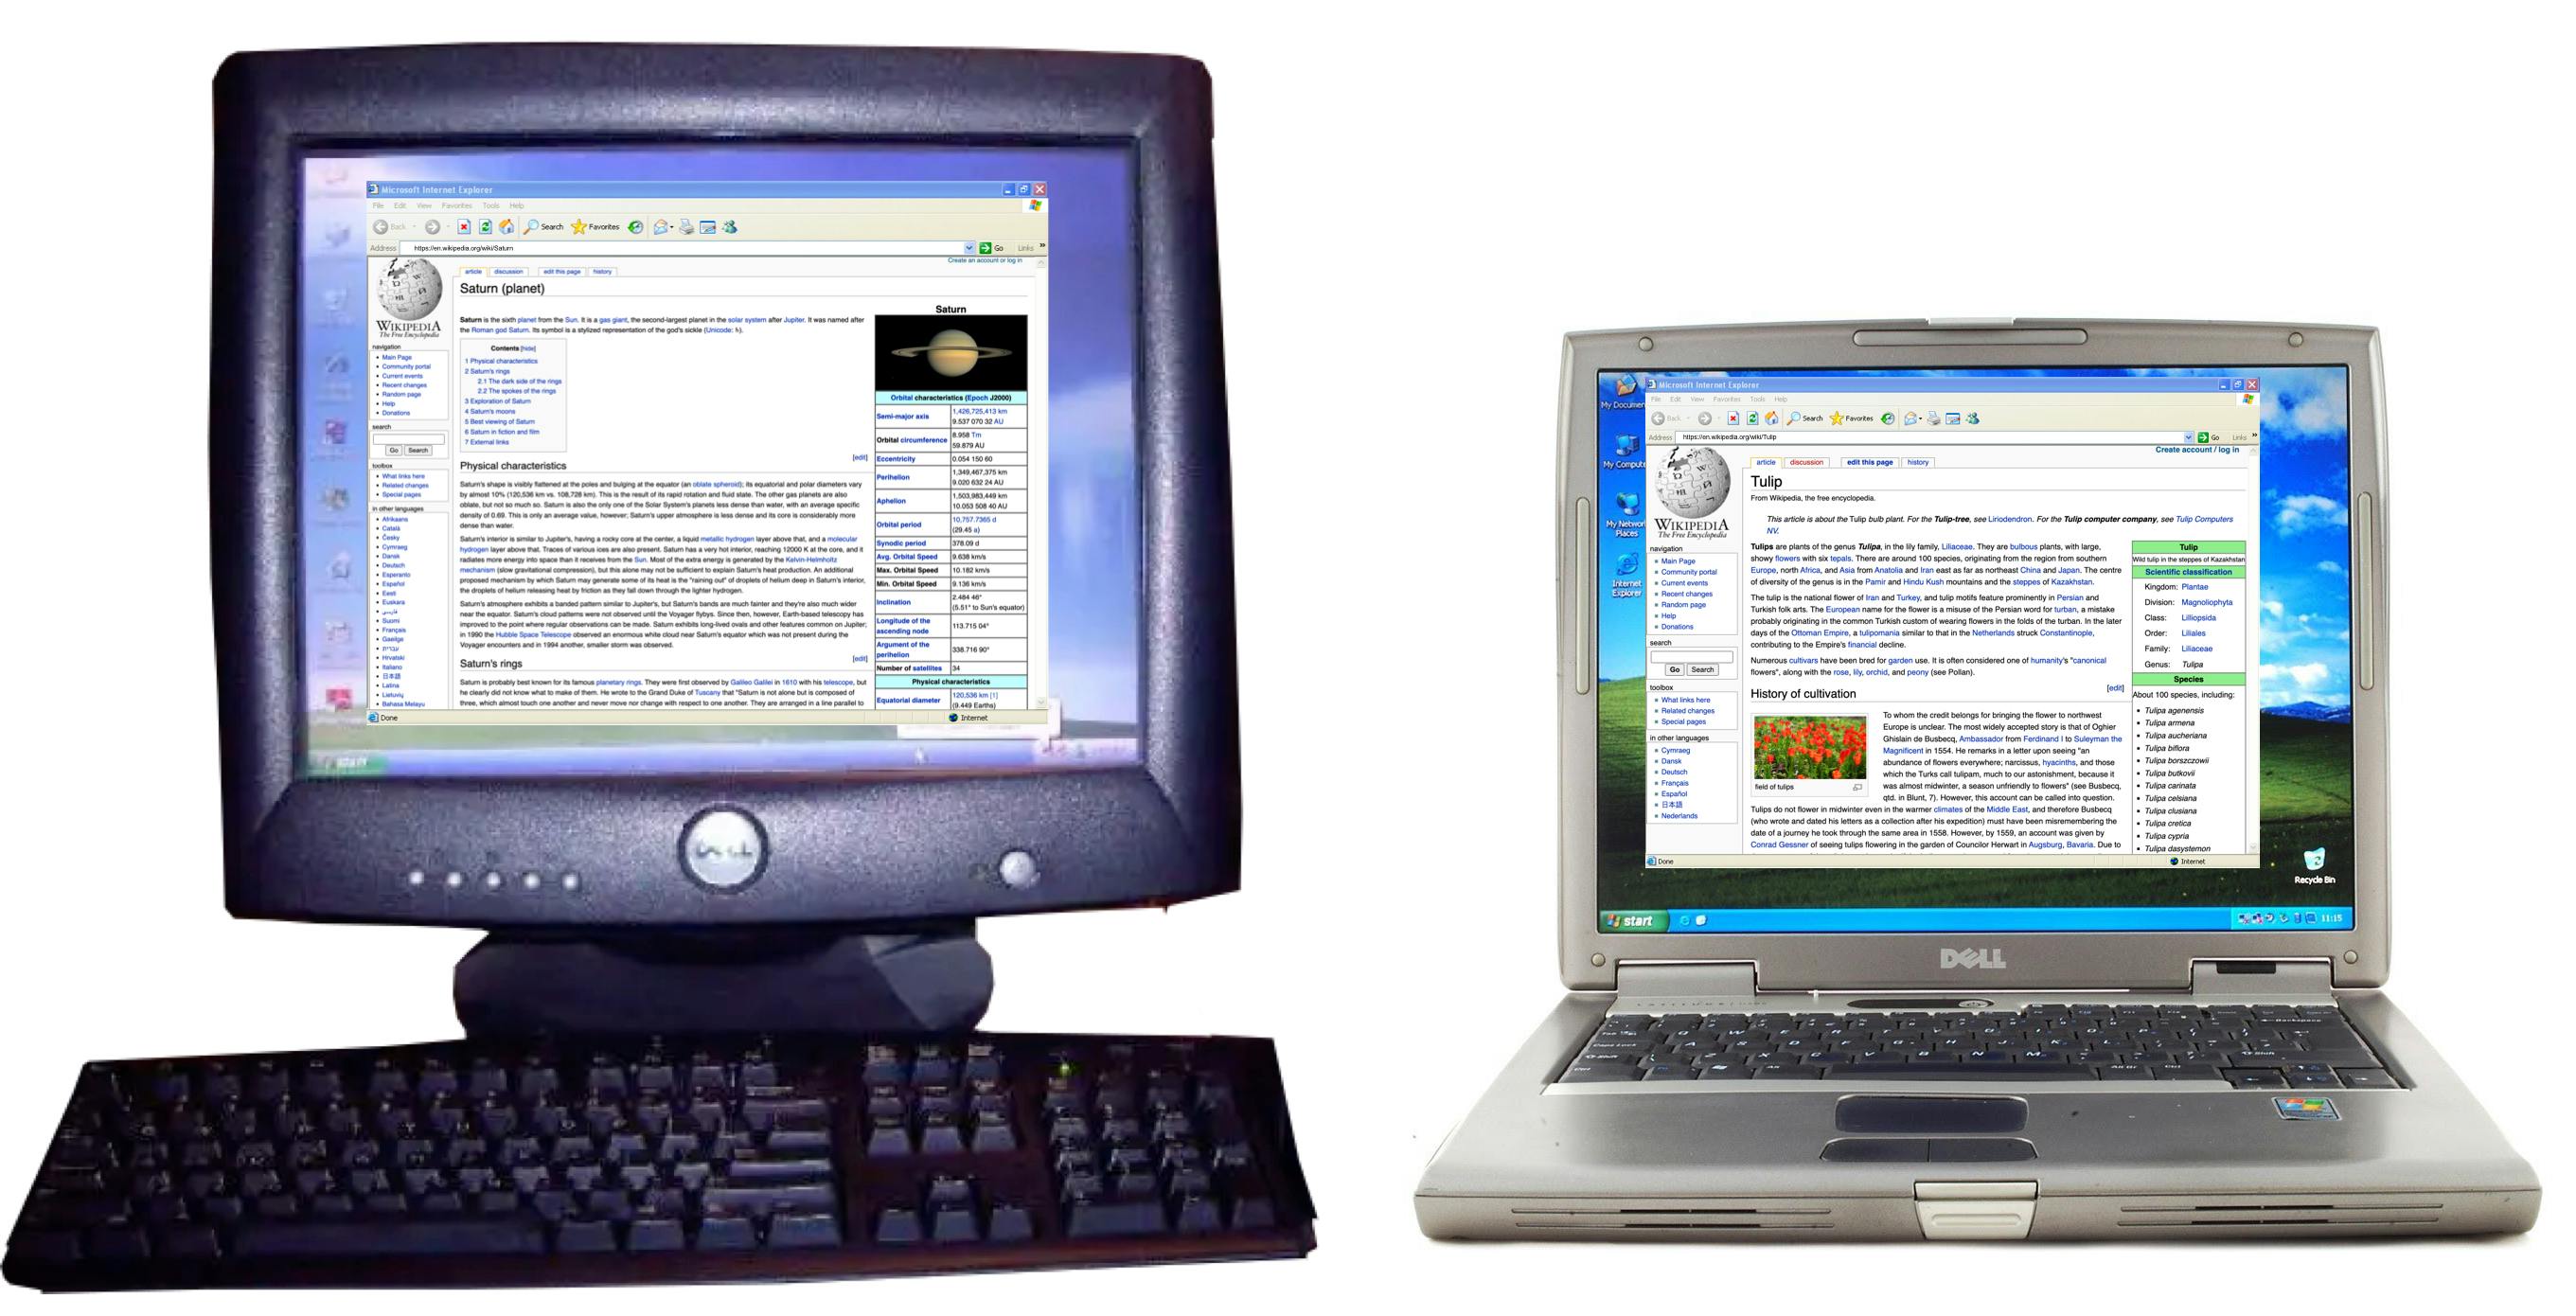 Wikipedia on a Dell desktop and Dell laptop in 2004